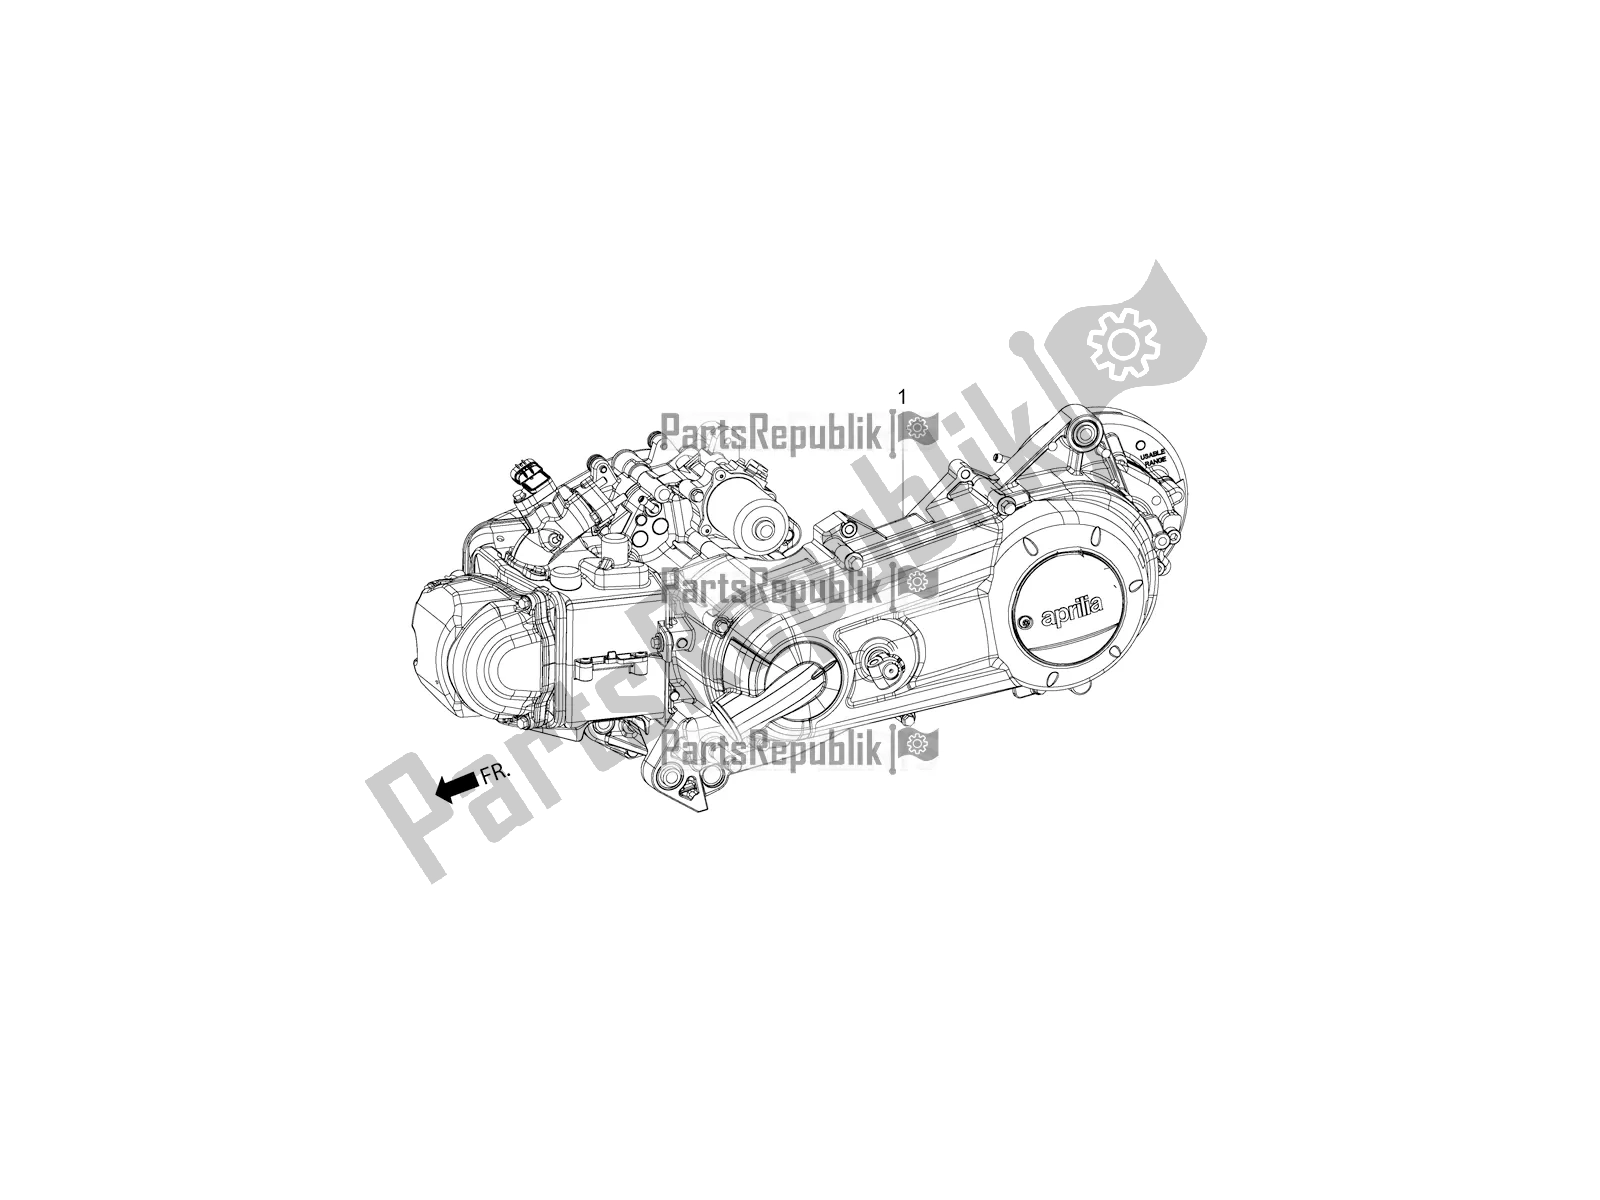 All parts for the Complete Engine of the Aprilia SR 150 4 T/3V 2021